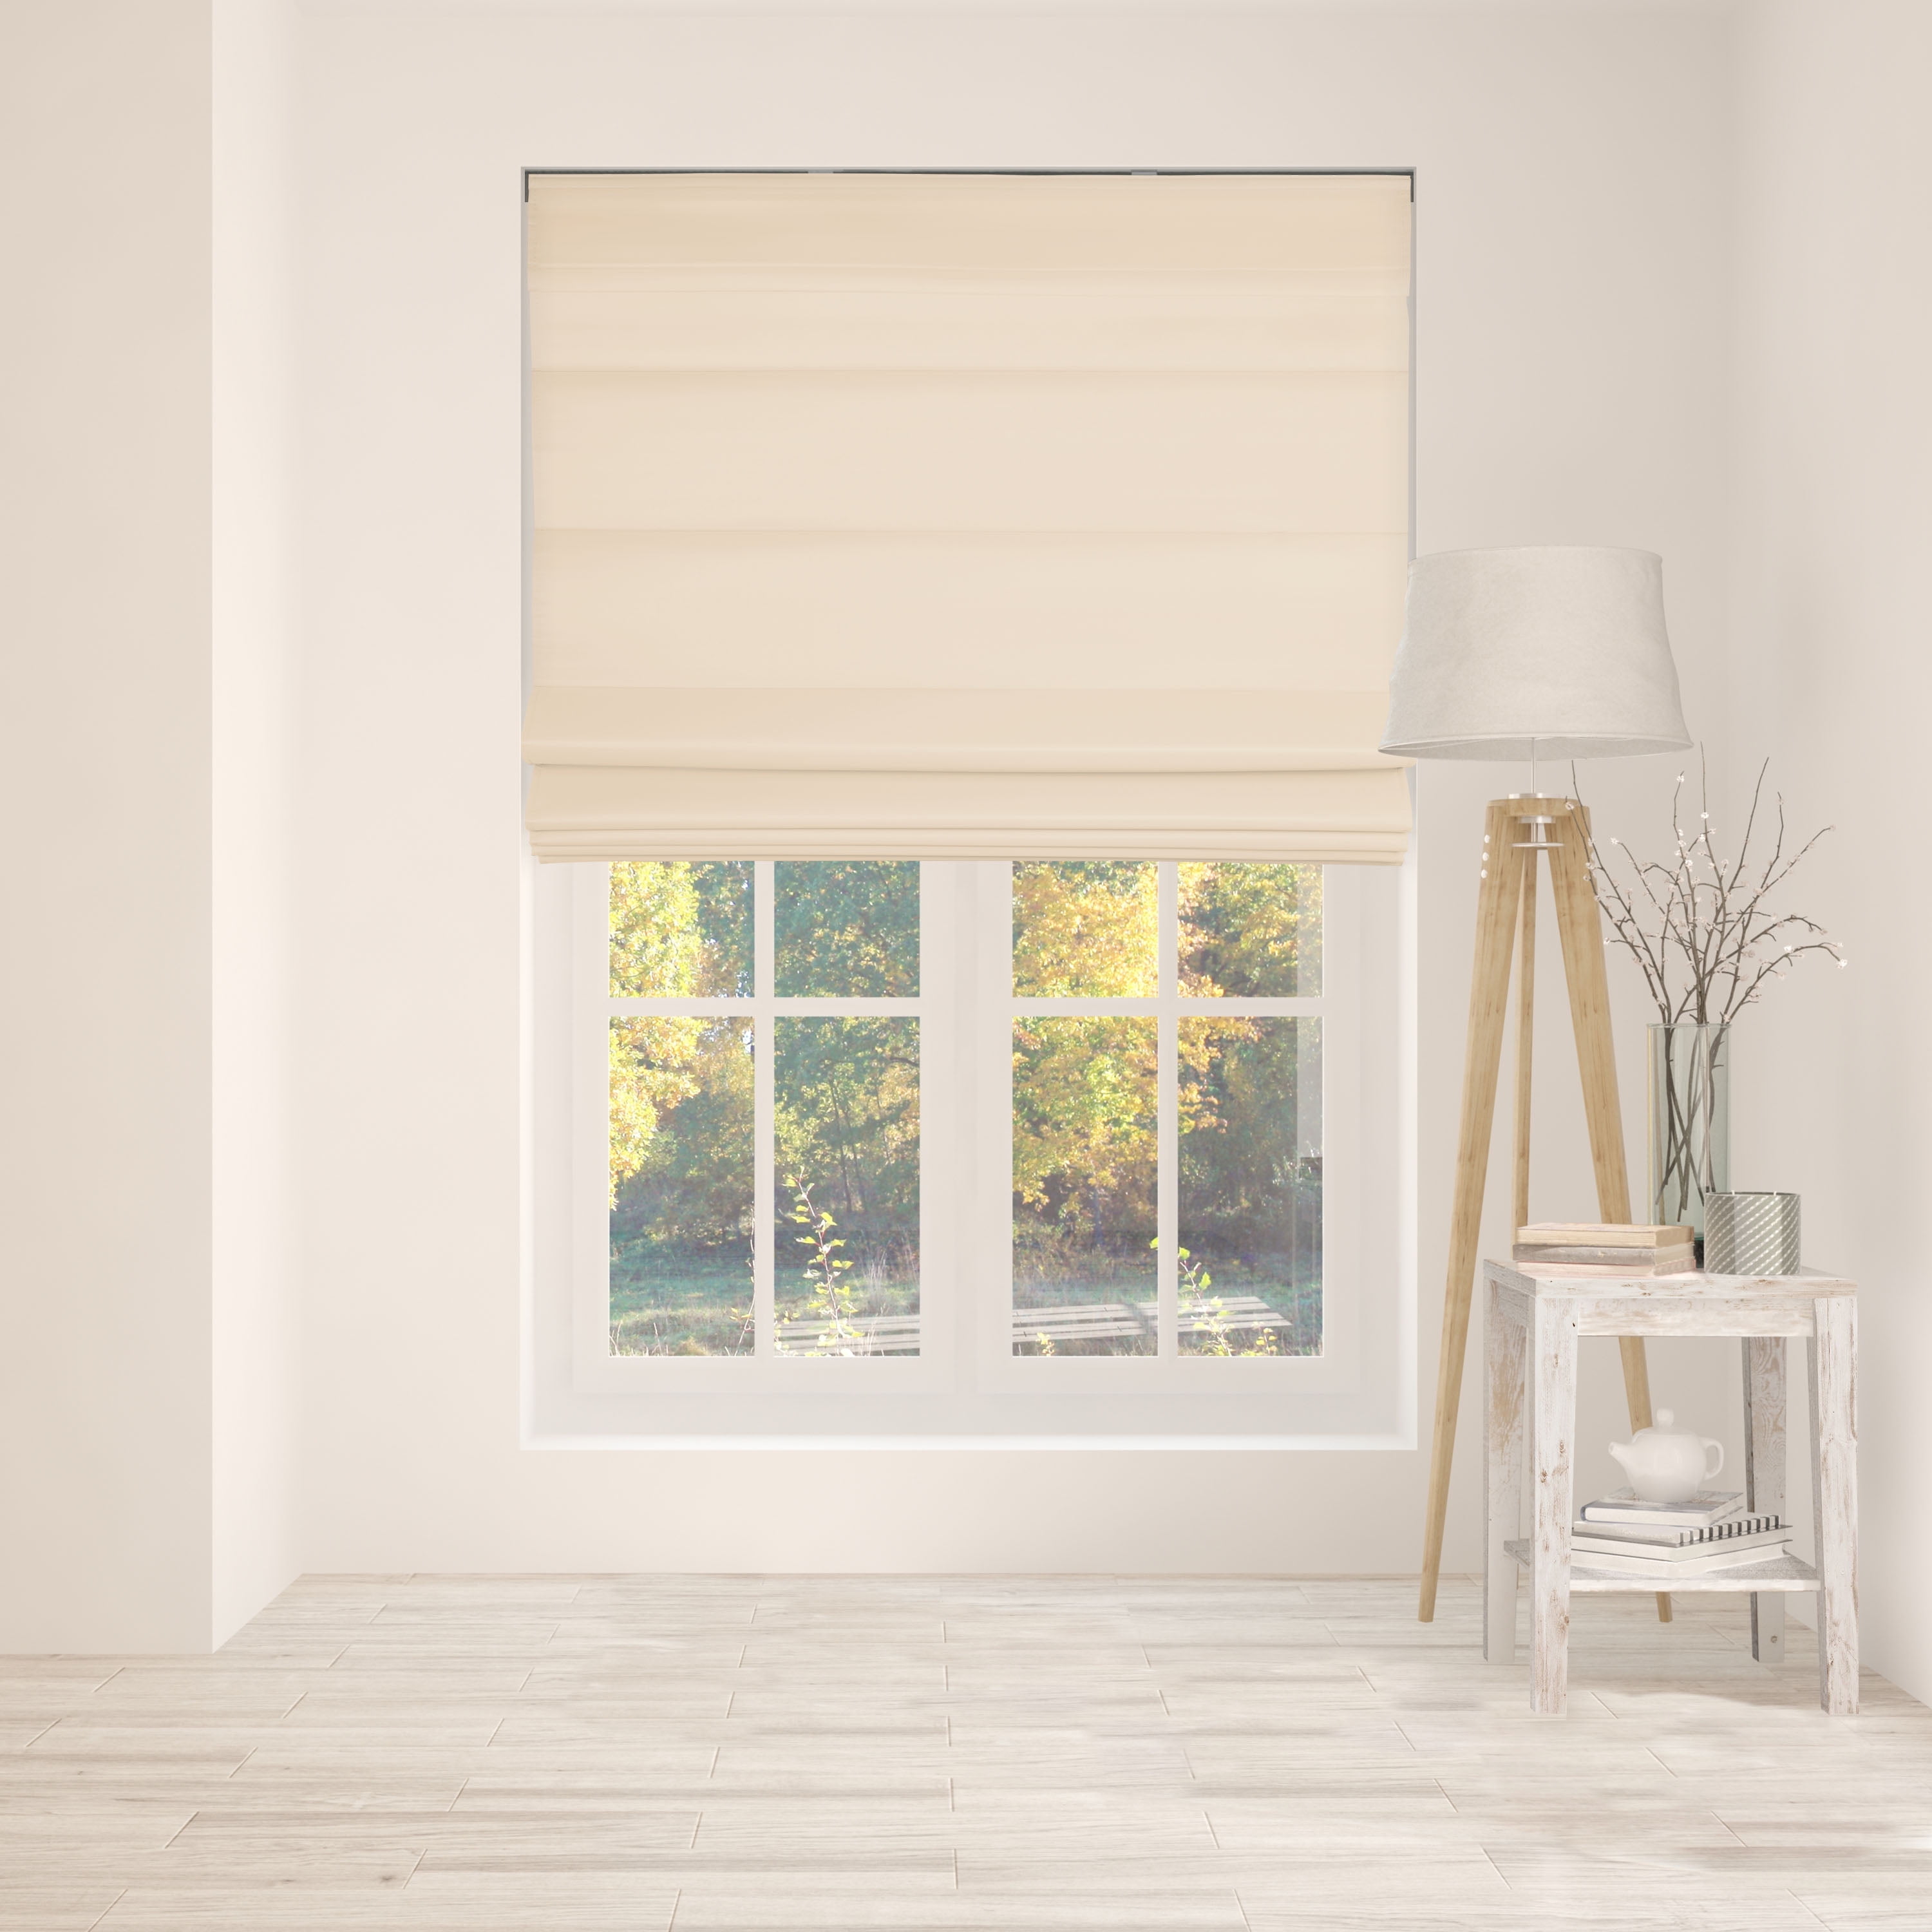 35 W x 60 H Arlo Blinds White Light Filtering Top Down Bottom Up Deluxe Cordless Cellular Shades Cordless Honeycomb Blinds Size 